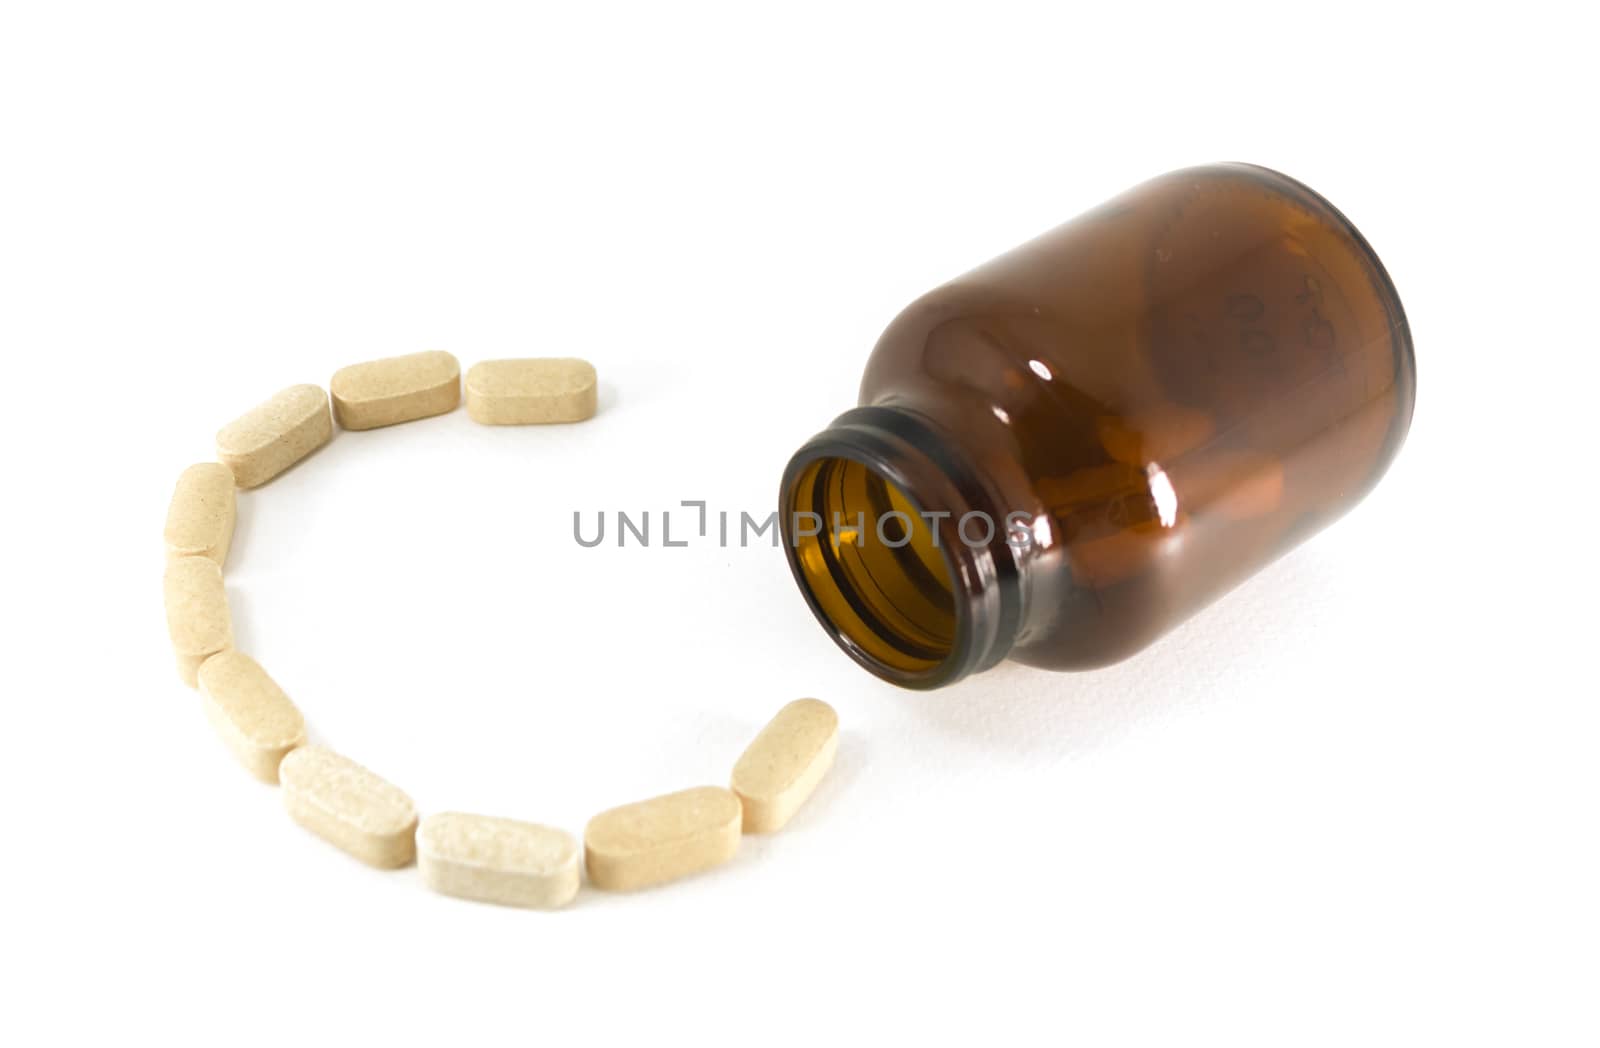 Pills of vitamin C in shape with bottle isolated on white background